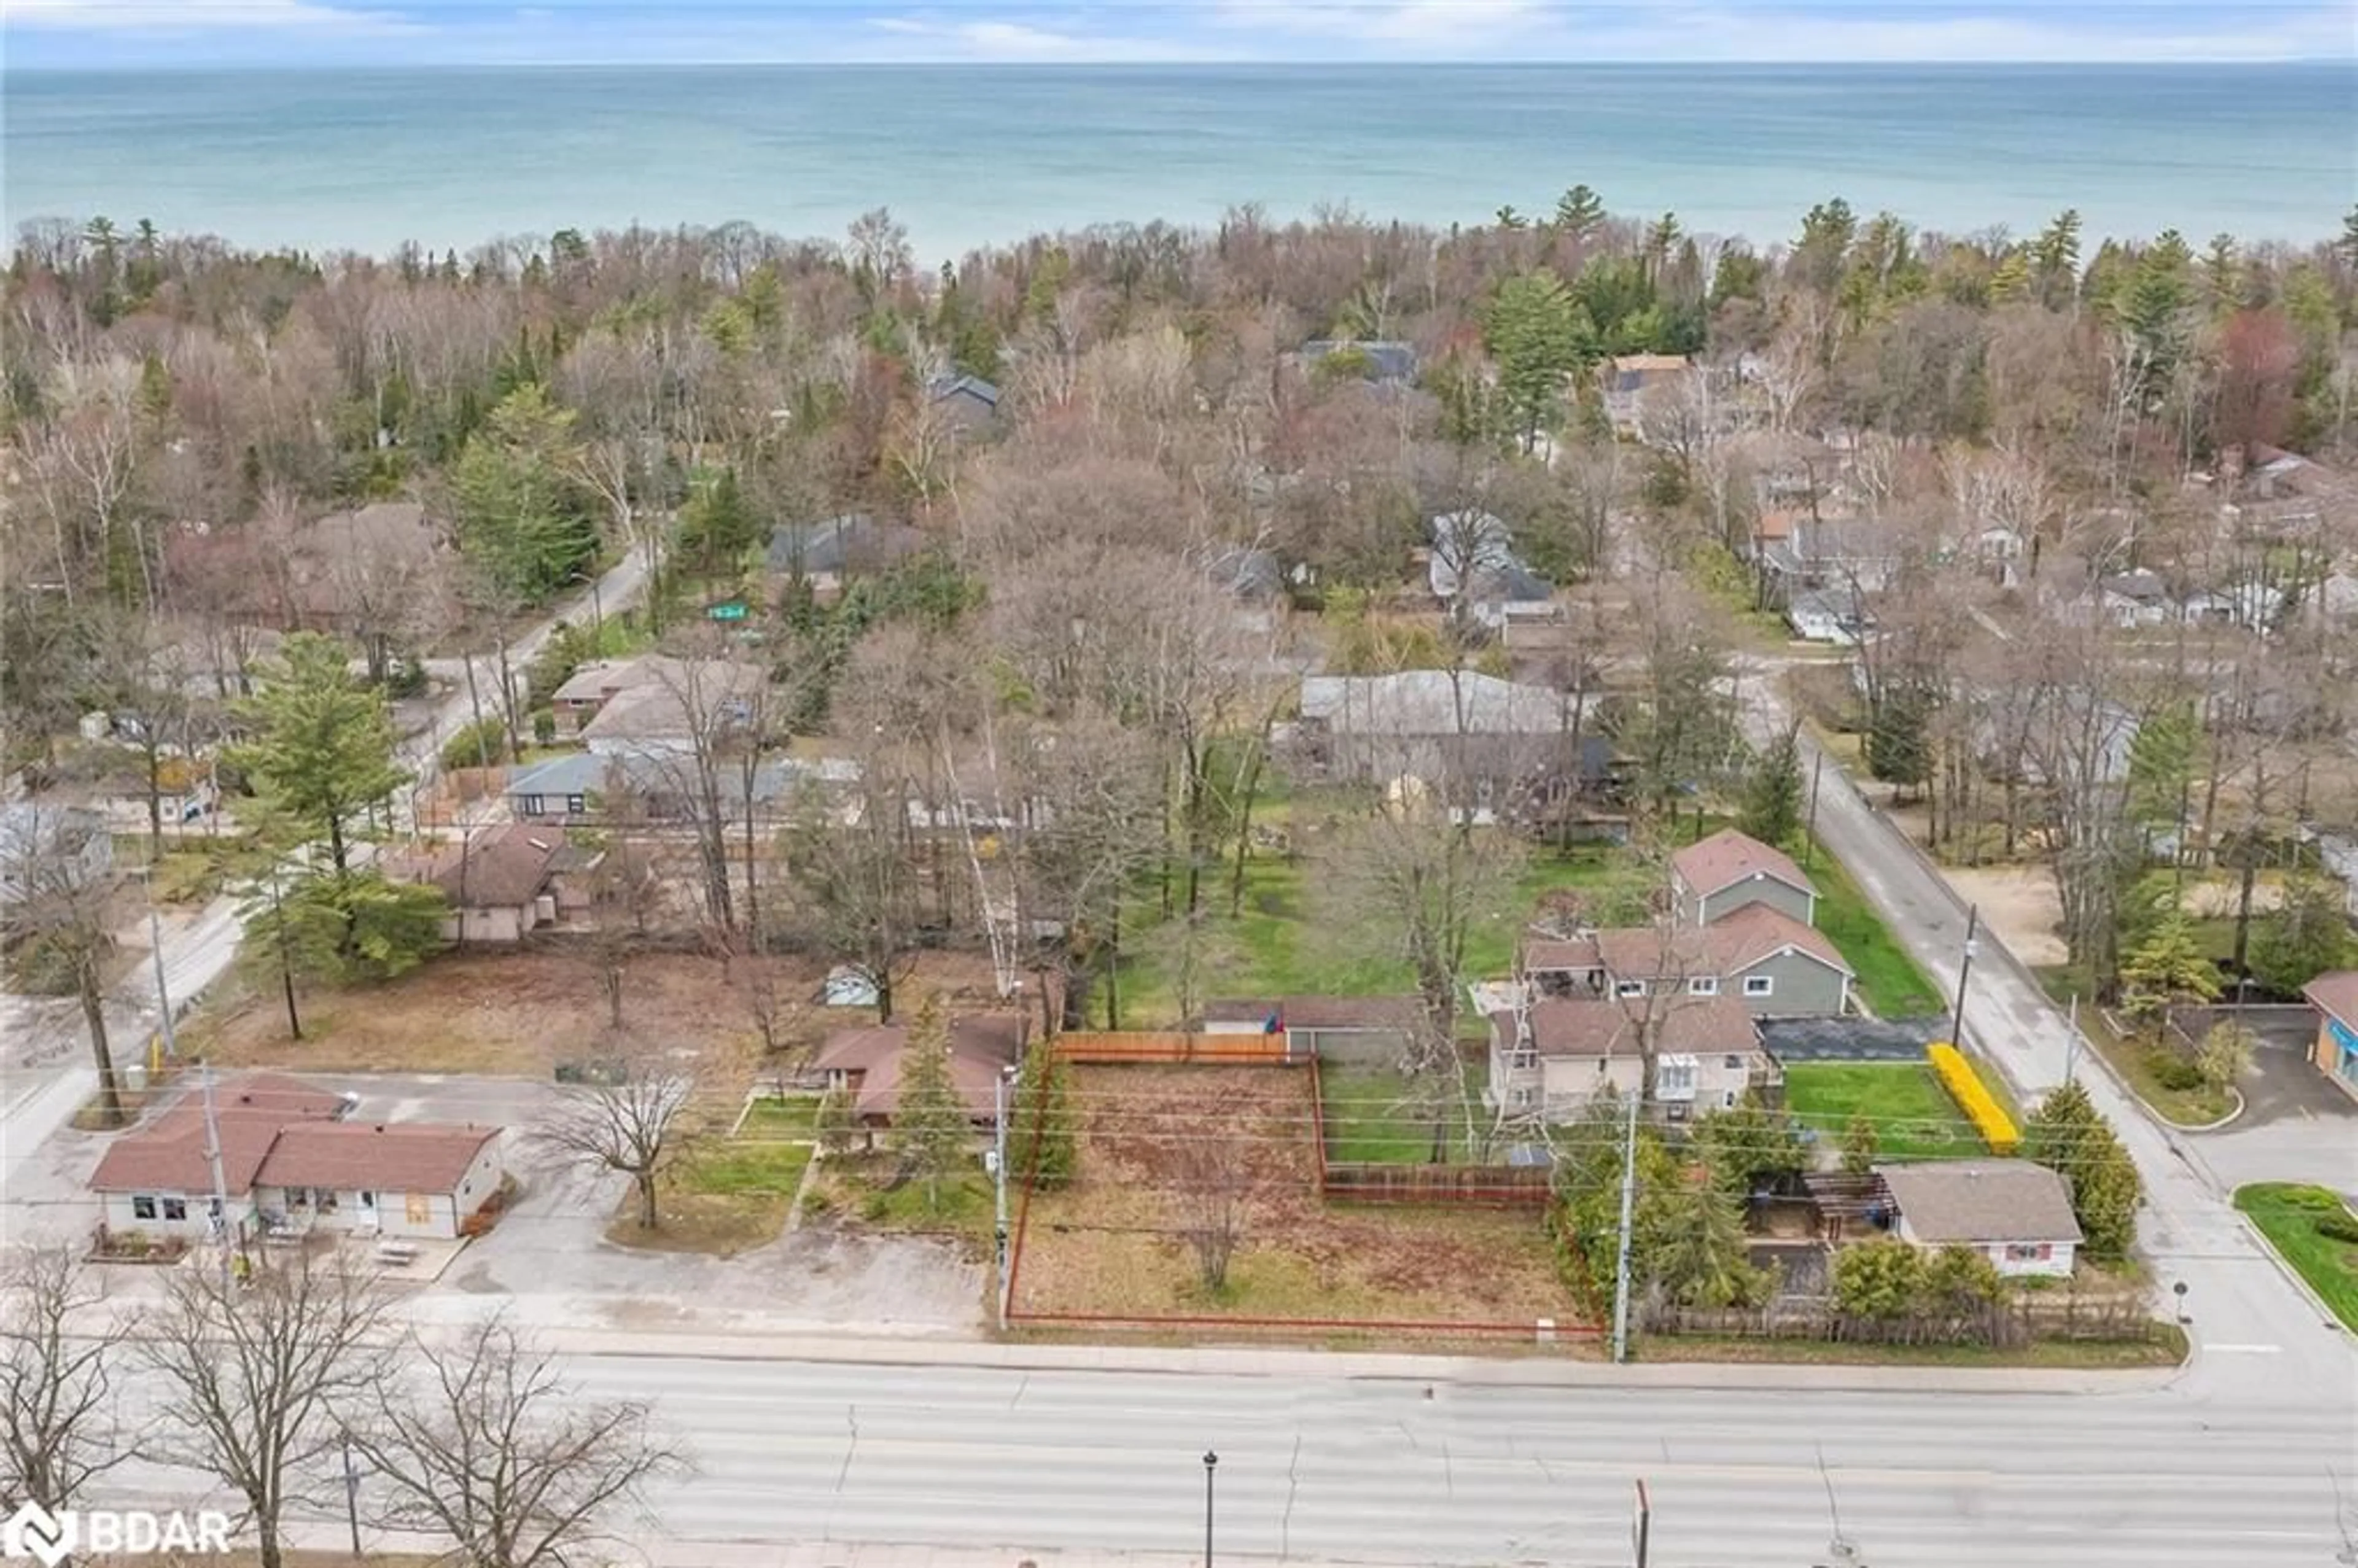 Lakeview for 1444 Mosley St, Wasaga Beach Ontario L9Z 2B9